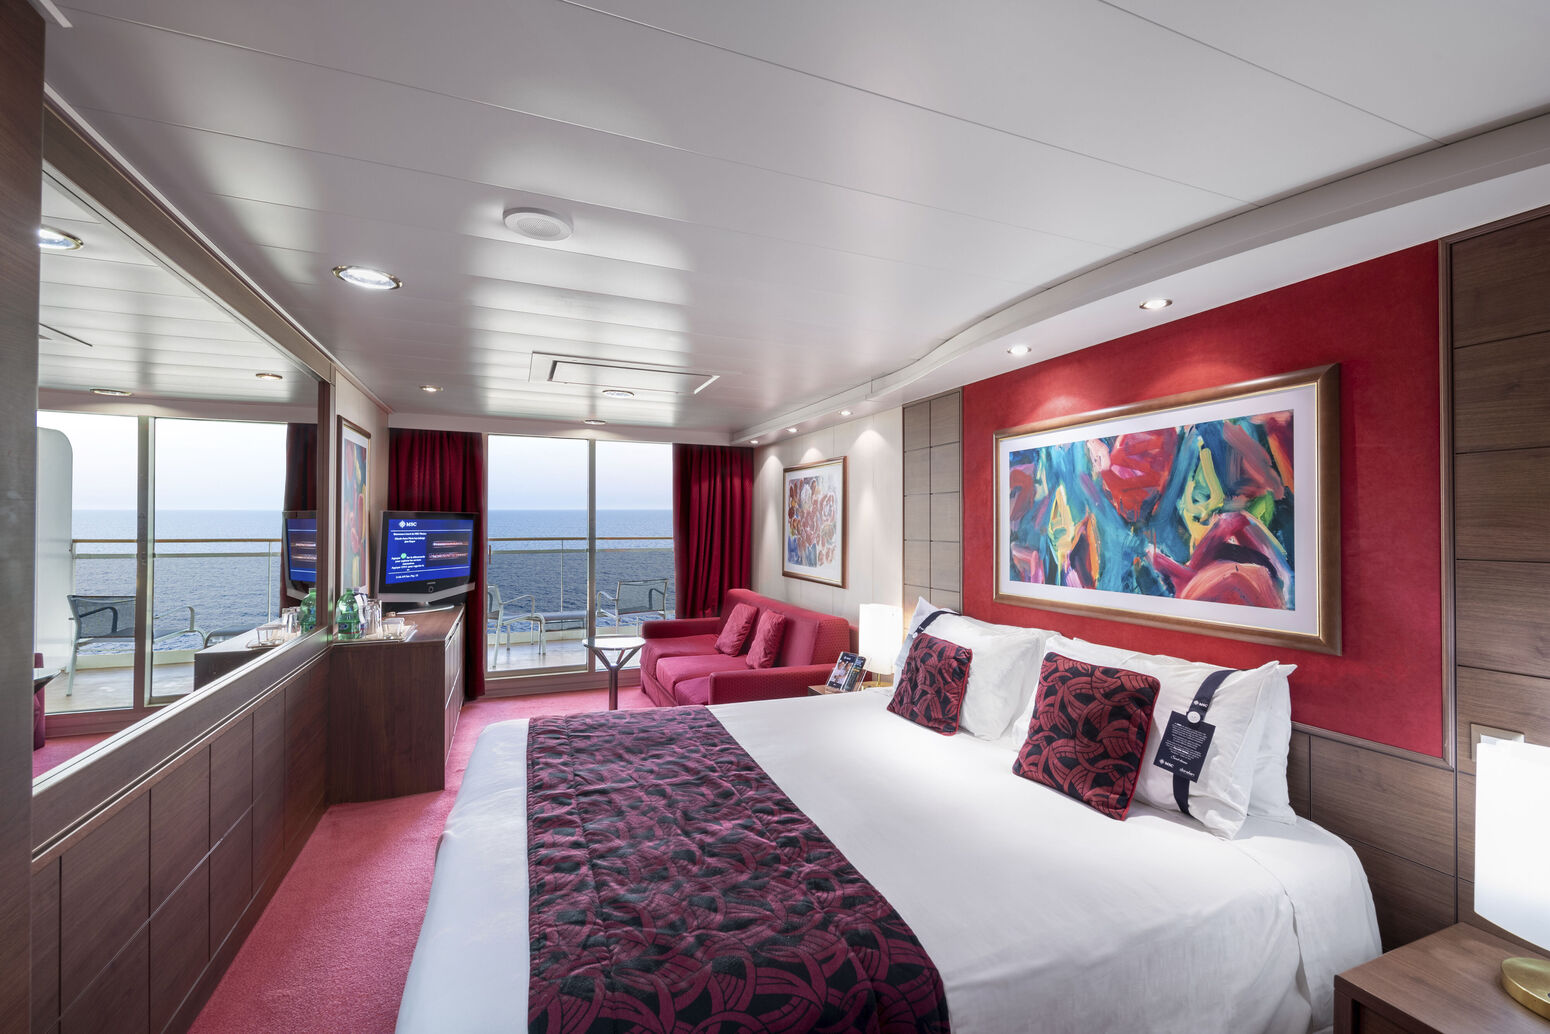 Cabins, Painting, Mirror, Sofa, Table, Writing desk, Television, Balcony, 15009, Fleet, Ship, MSC Musica, Suite, Double bed